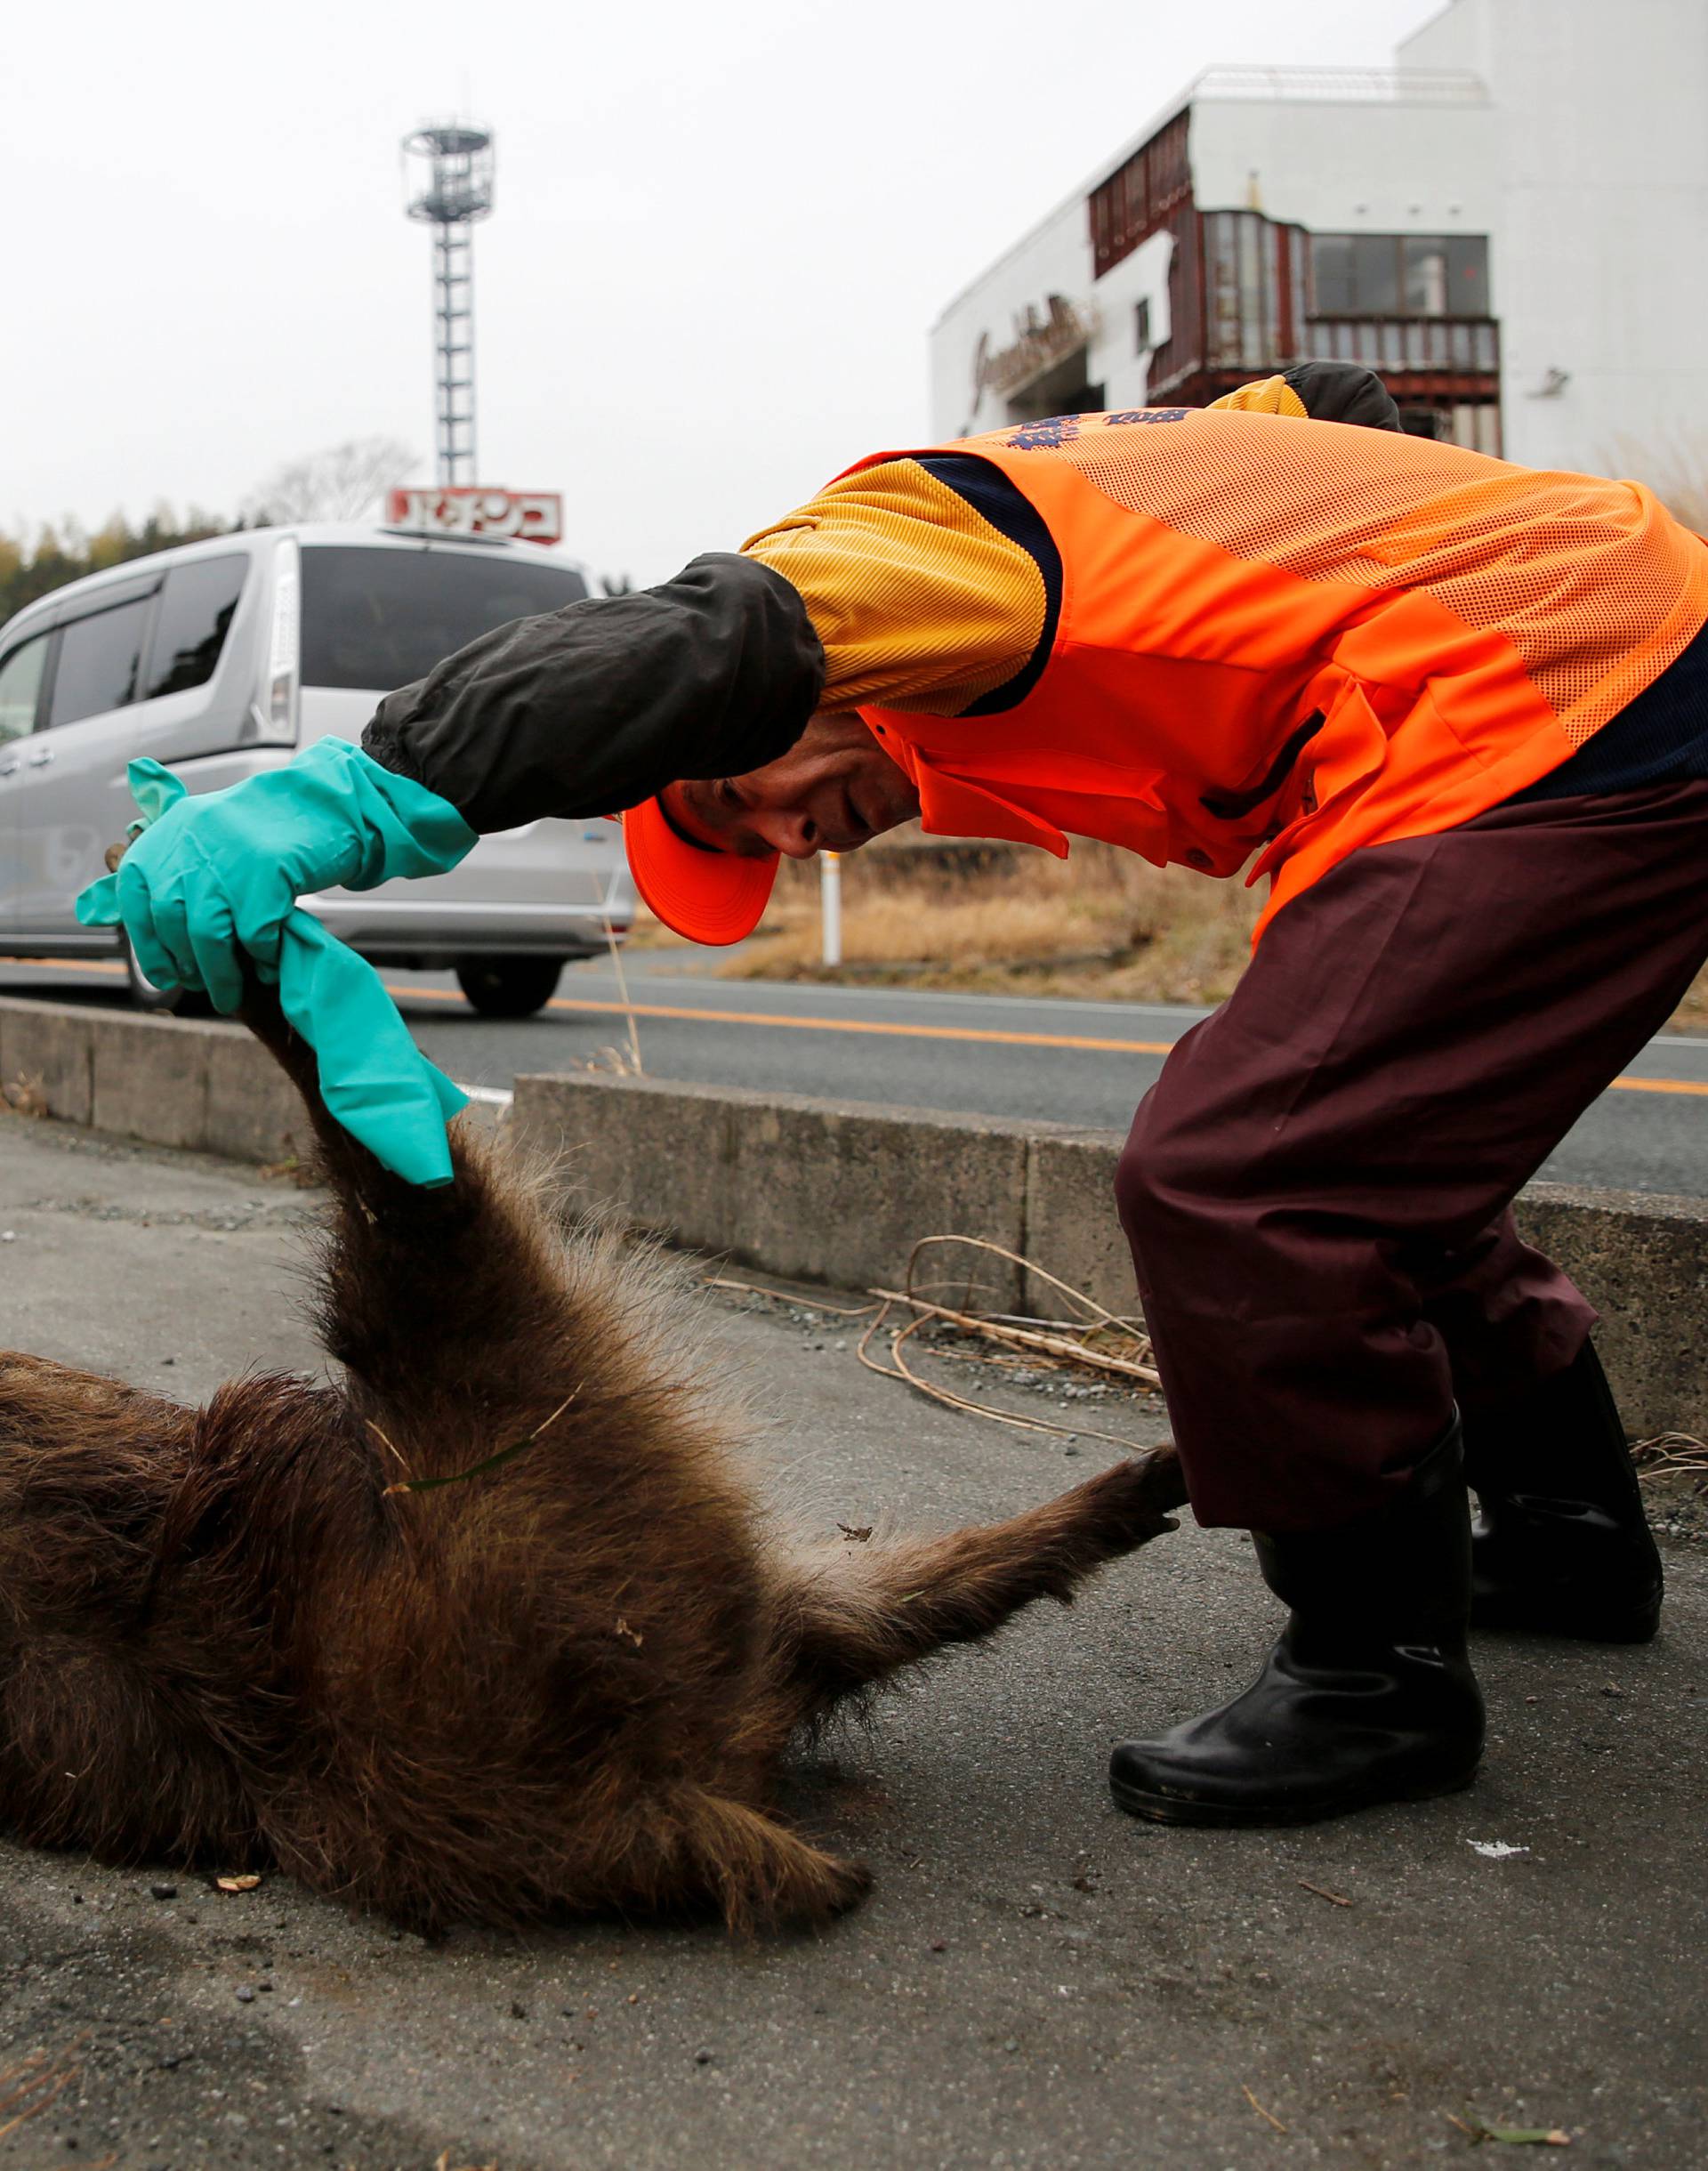 A member of Tomioka Town's animal control hunters group, looks at a wild boar killed by road accident on Route six in an evacuation zone near TEPCO's tsunami-crippled Fukushima Daiichi nuclear power plant in Tomioka town